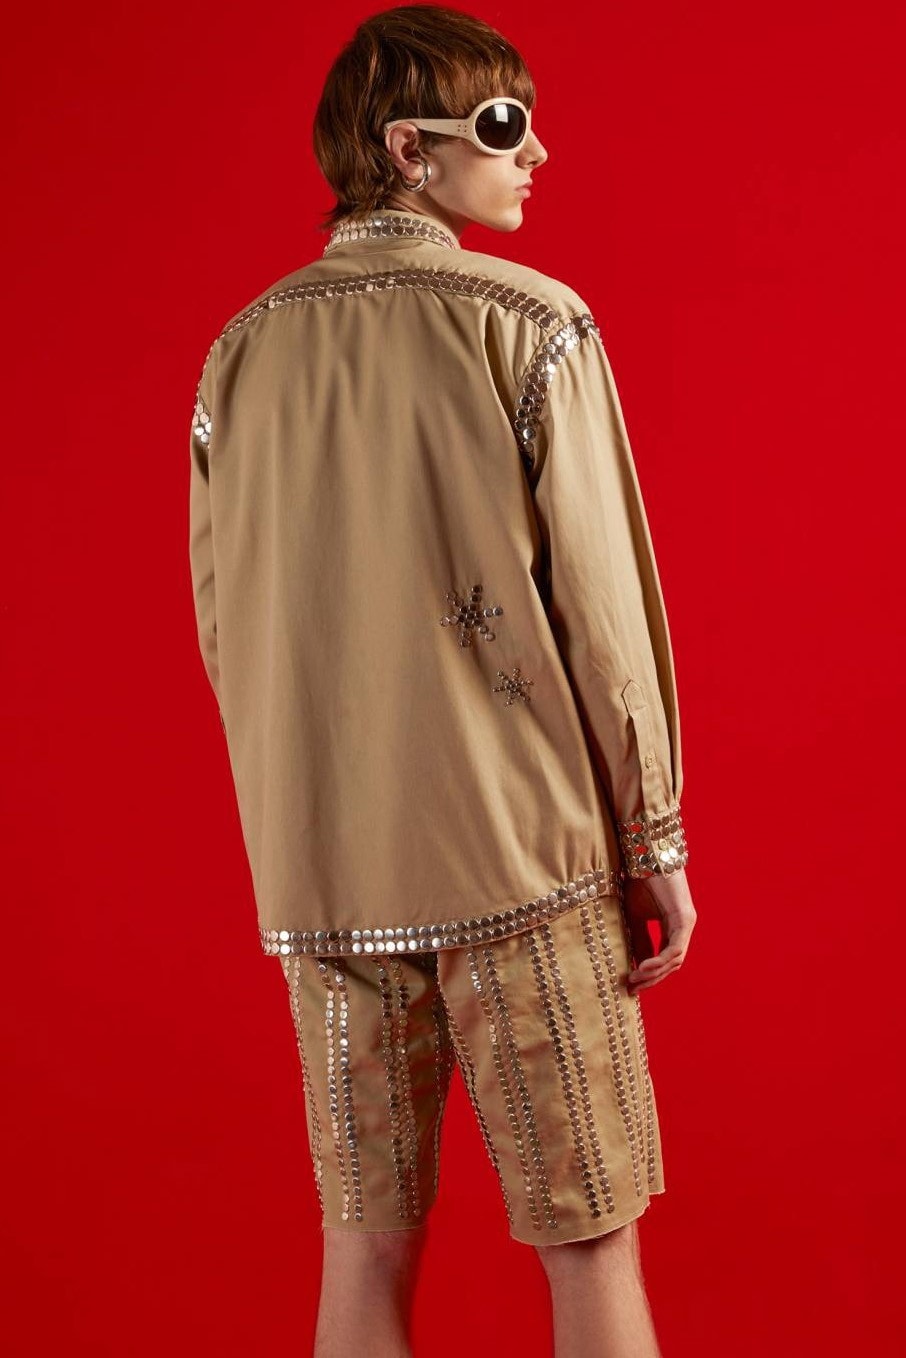 gucci dickies diamonds gold silver studs spikes jackets pants shorts